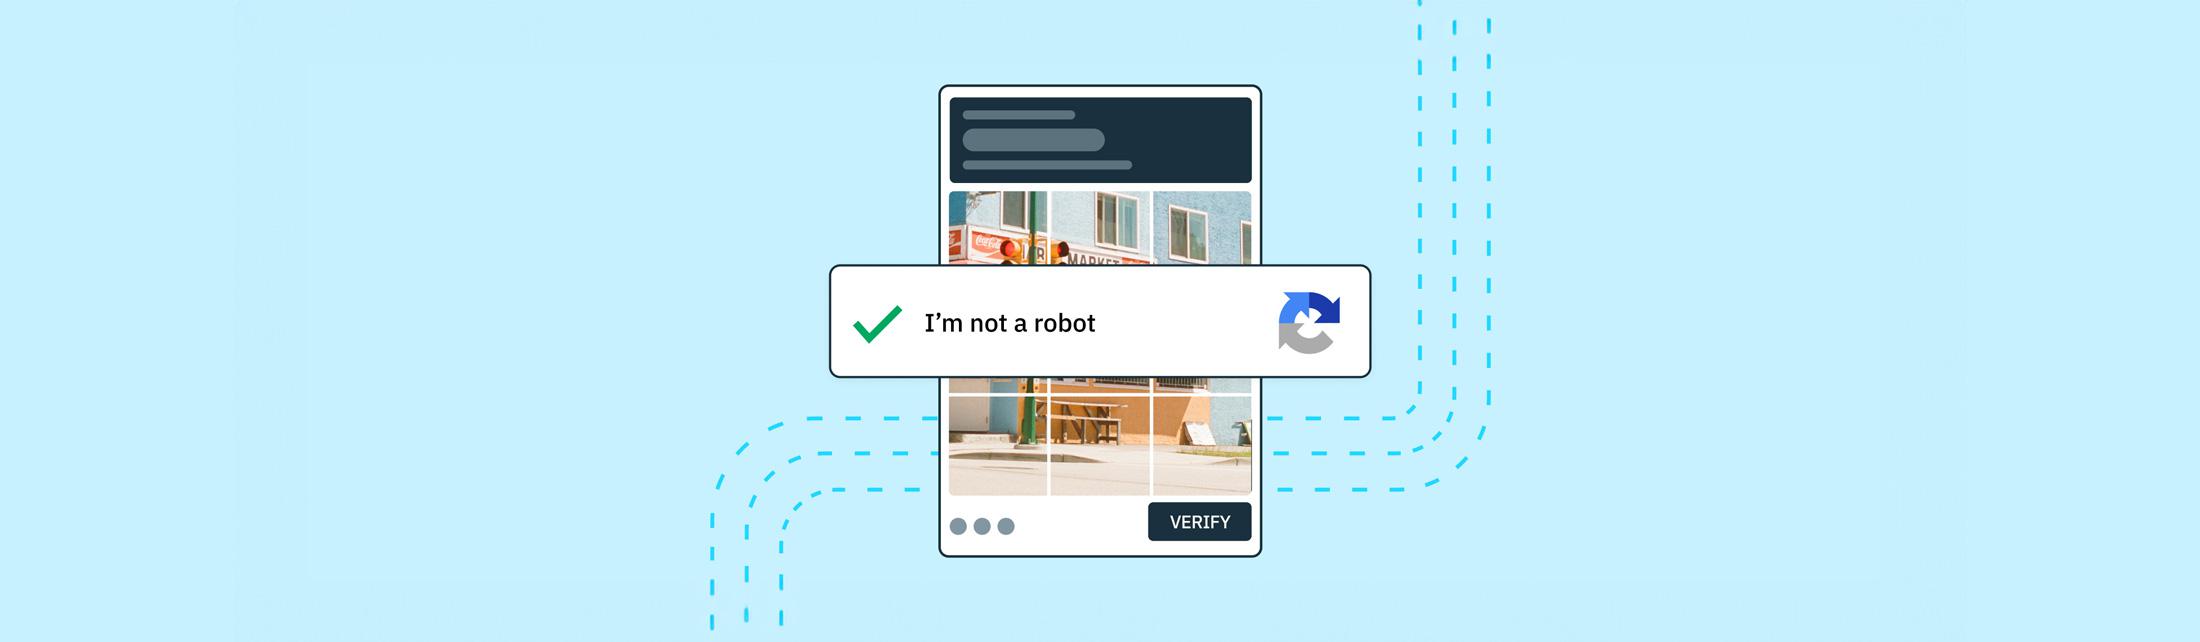 Captcha: What does it mean and how can we make it less irritating?